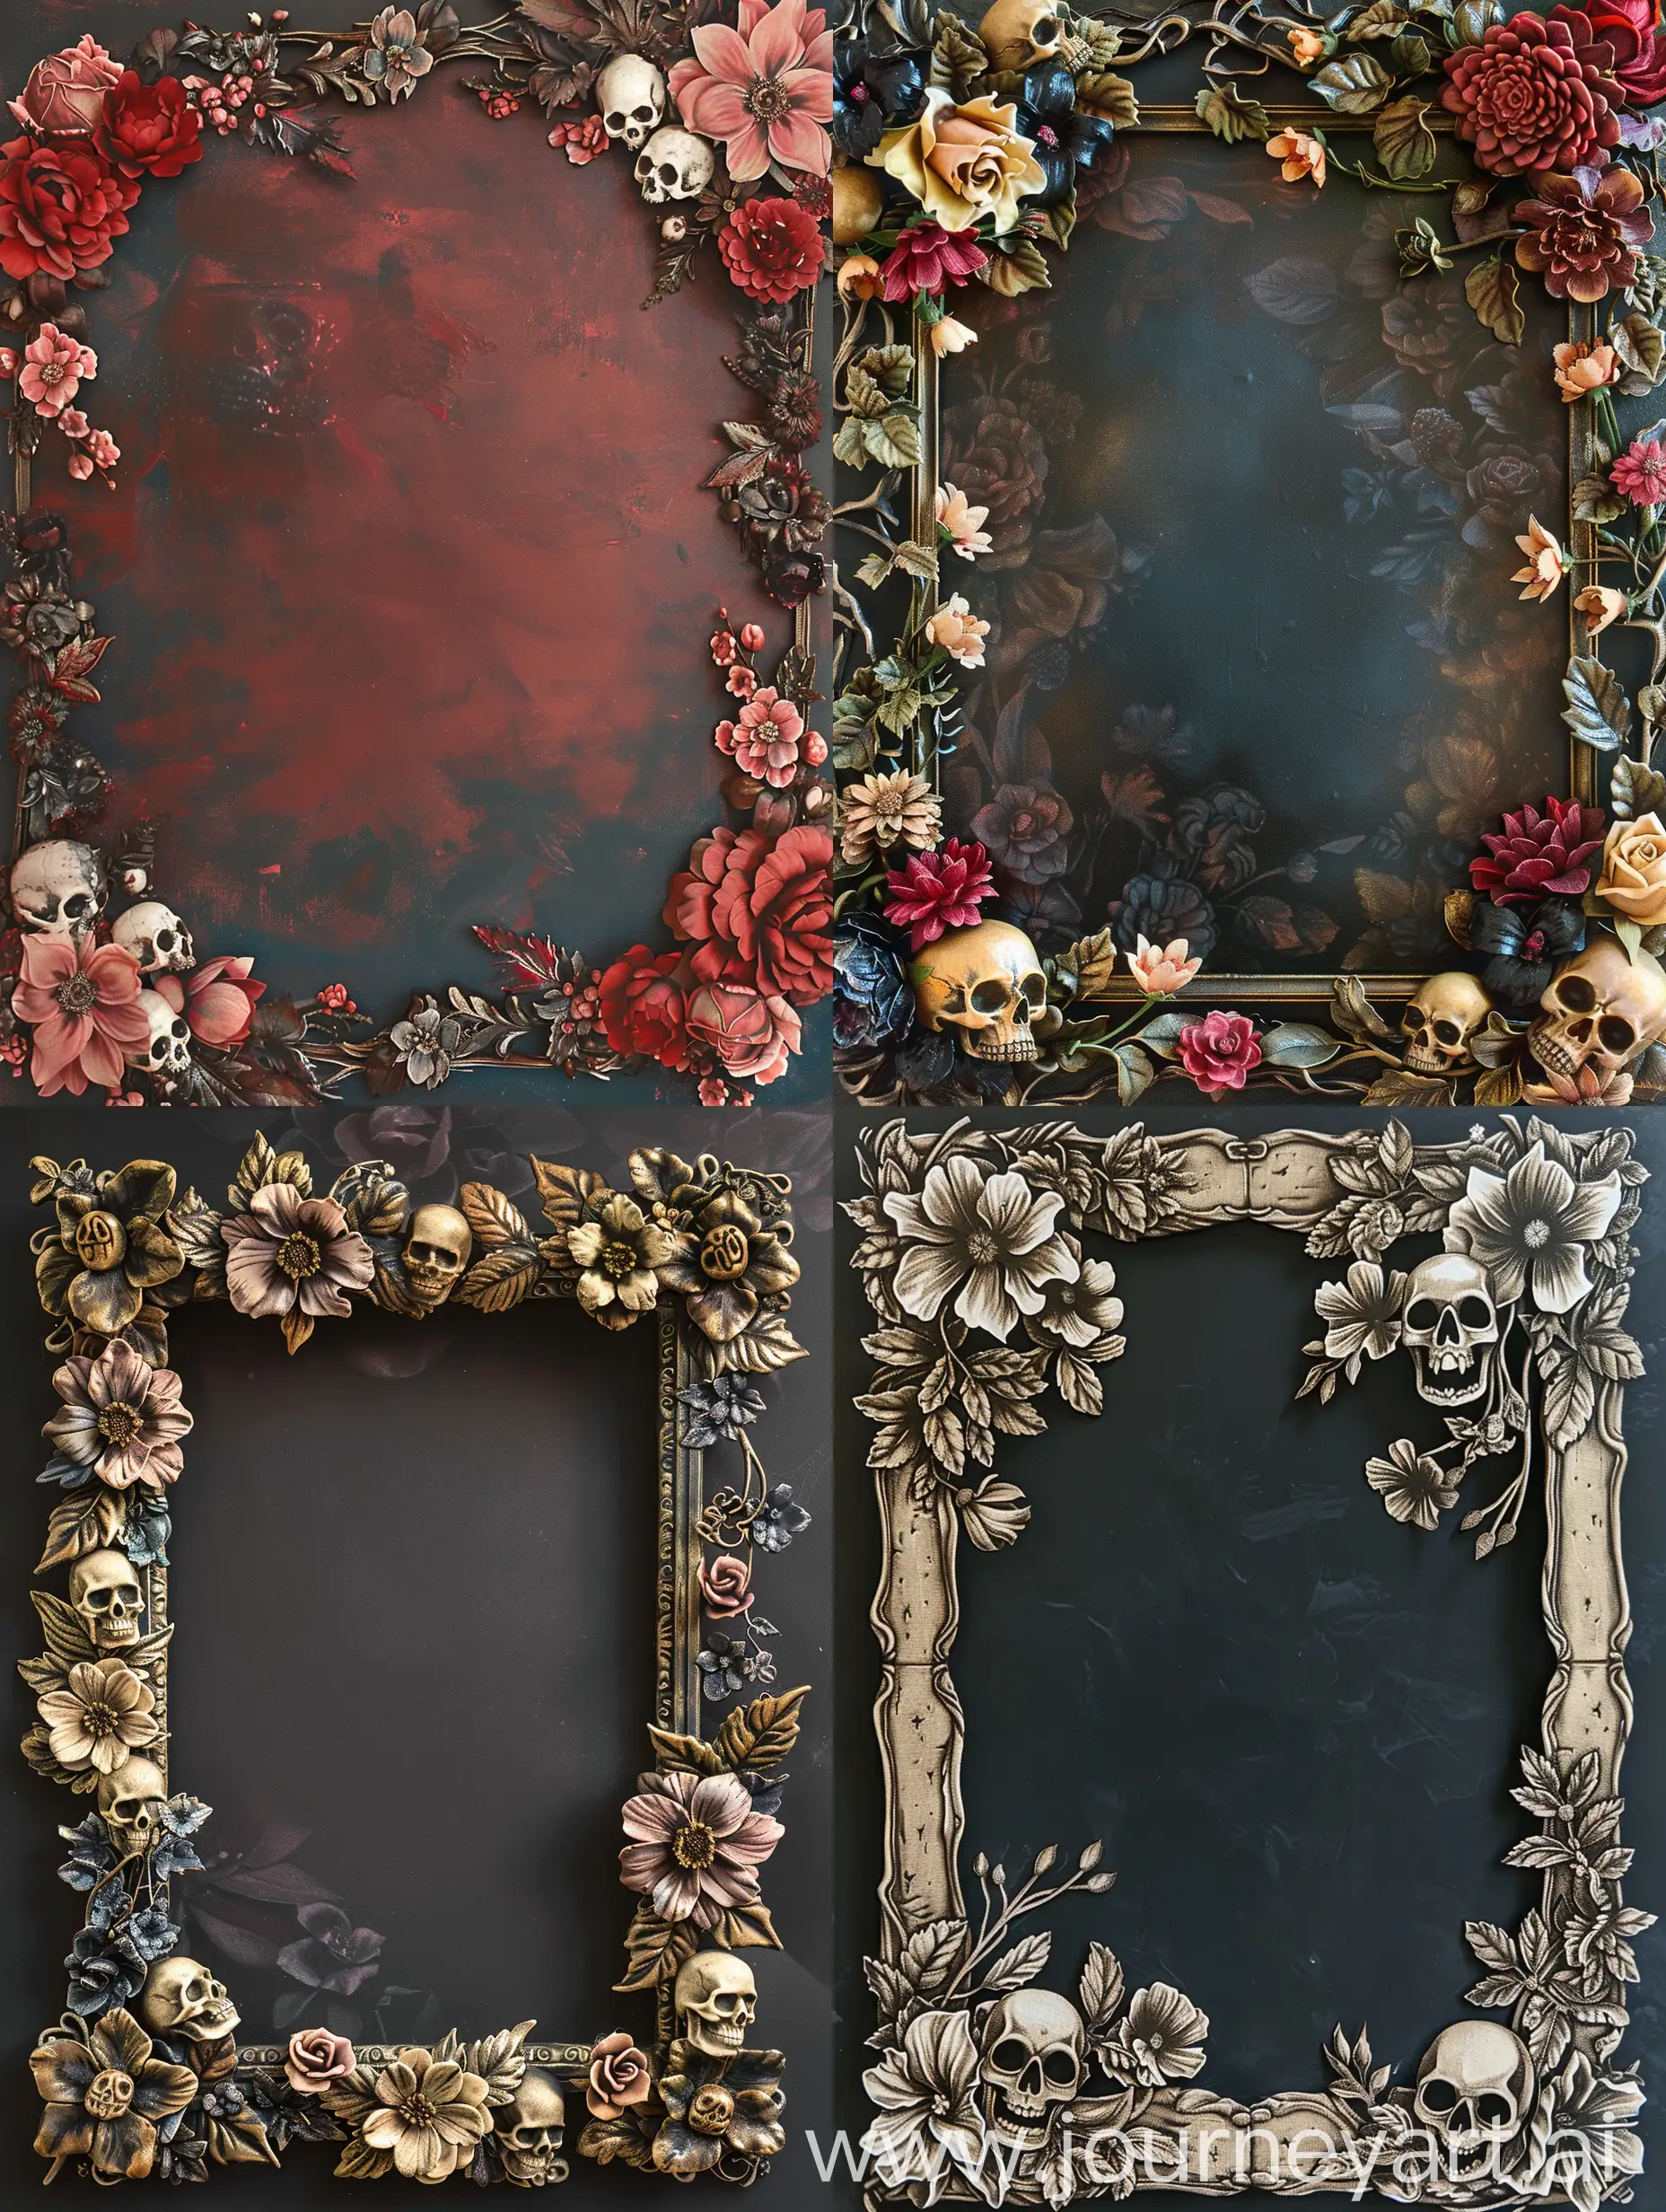 Scary canvas frame ornated with flowers and skulls